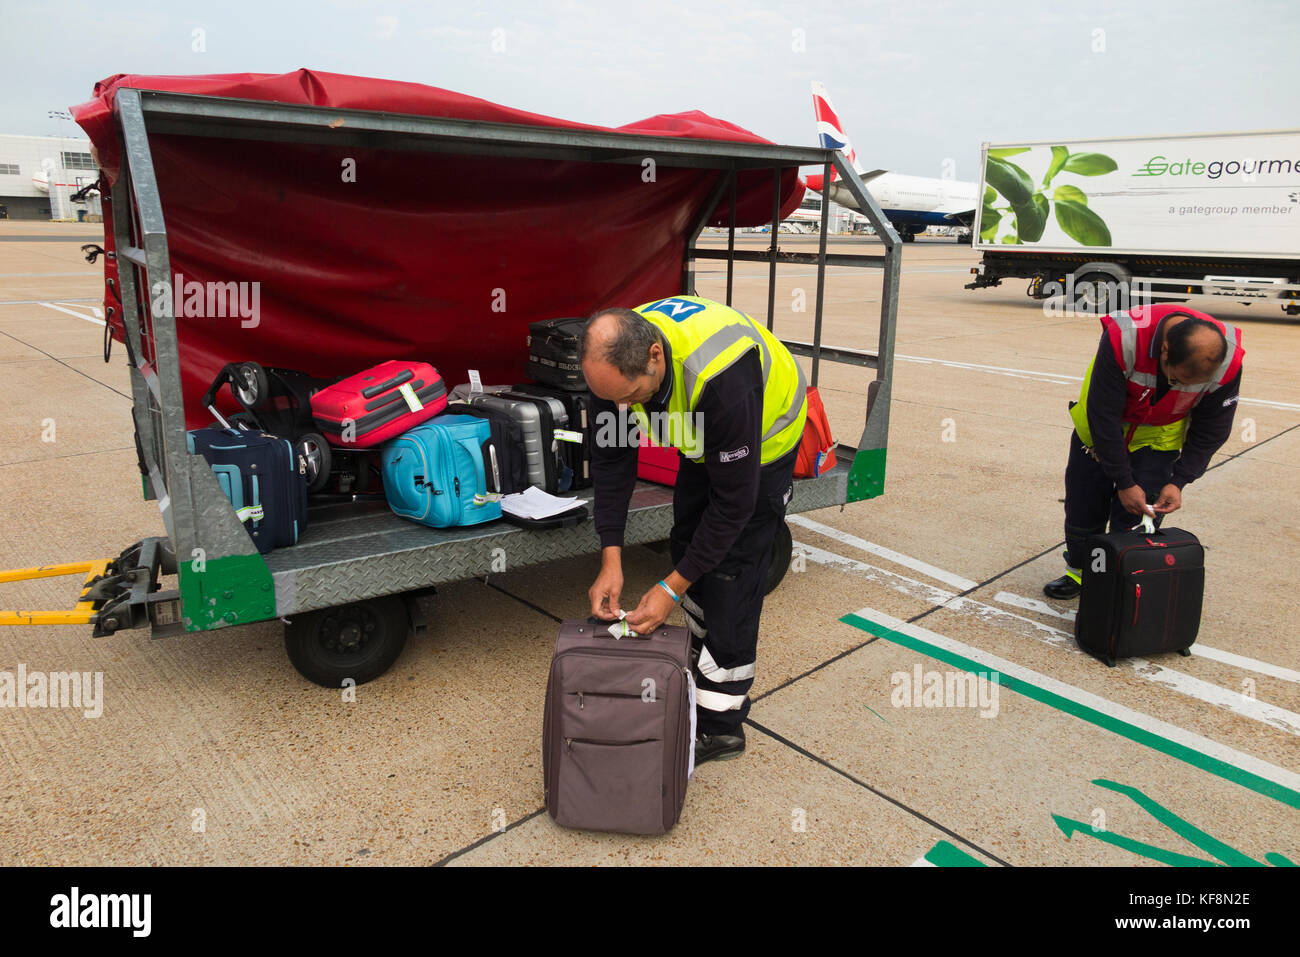 Baggage handlers trolley / truck carrier / vehicle / aircraft loader / container / ground support staff / carrying & loading passenger hold luggage. Stock Photo